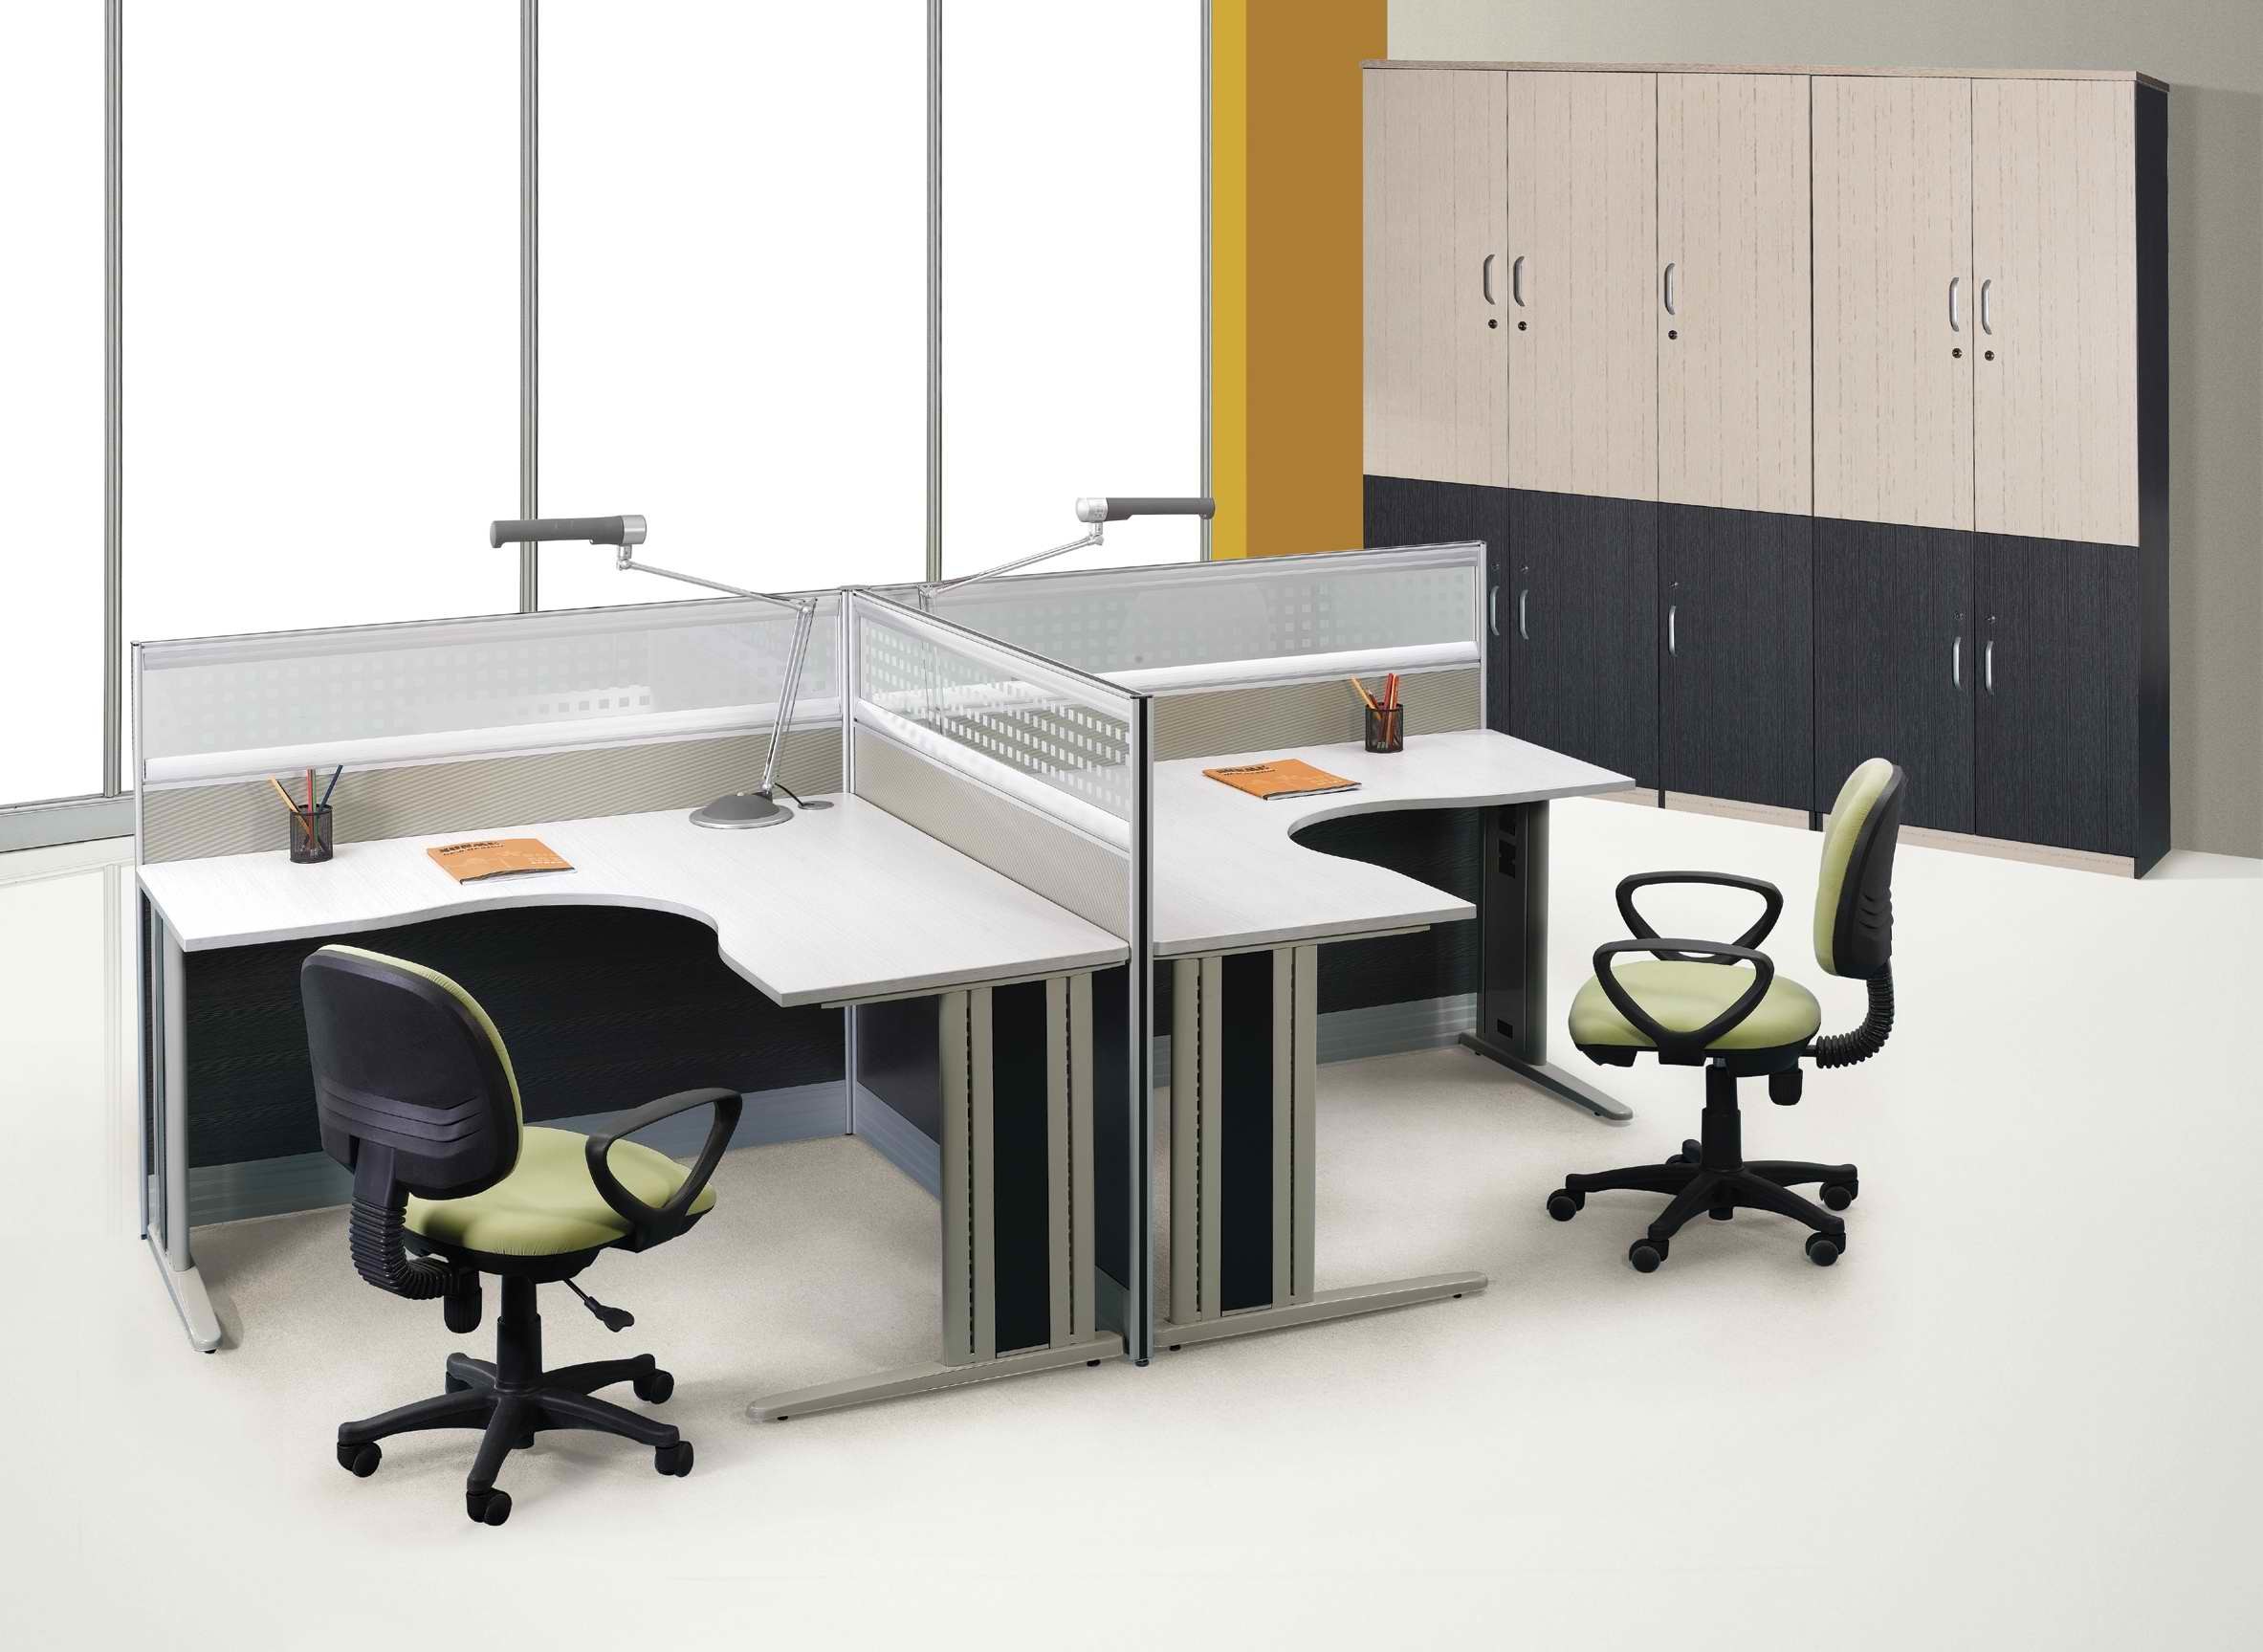 2366x1727 Modular Office Furniture Awesome Wallpaper Gallery 1n38ng 